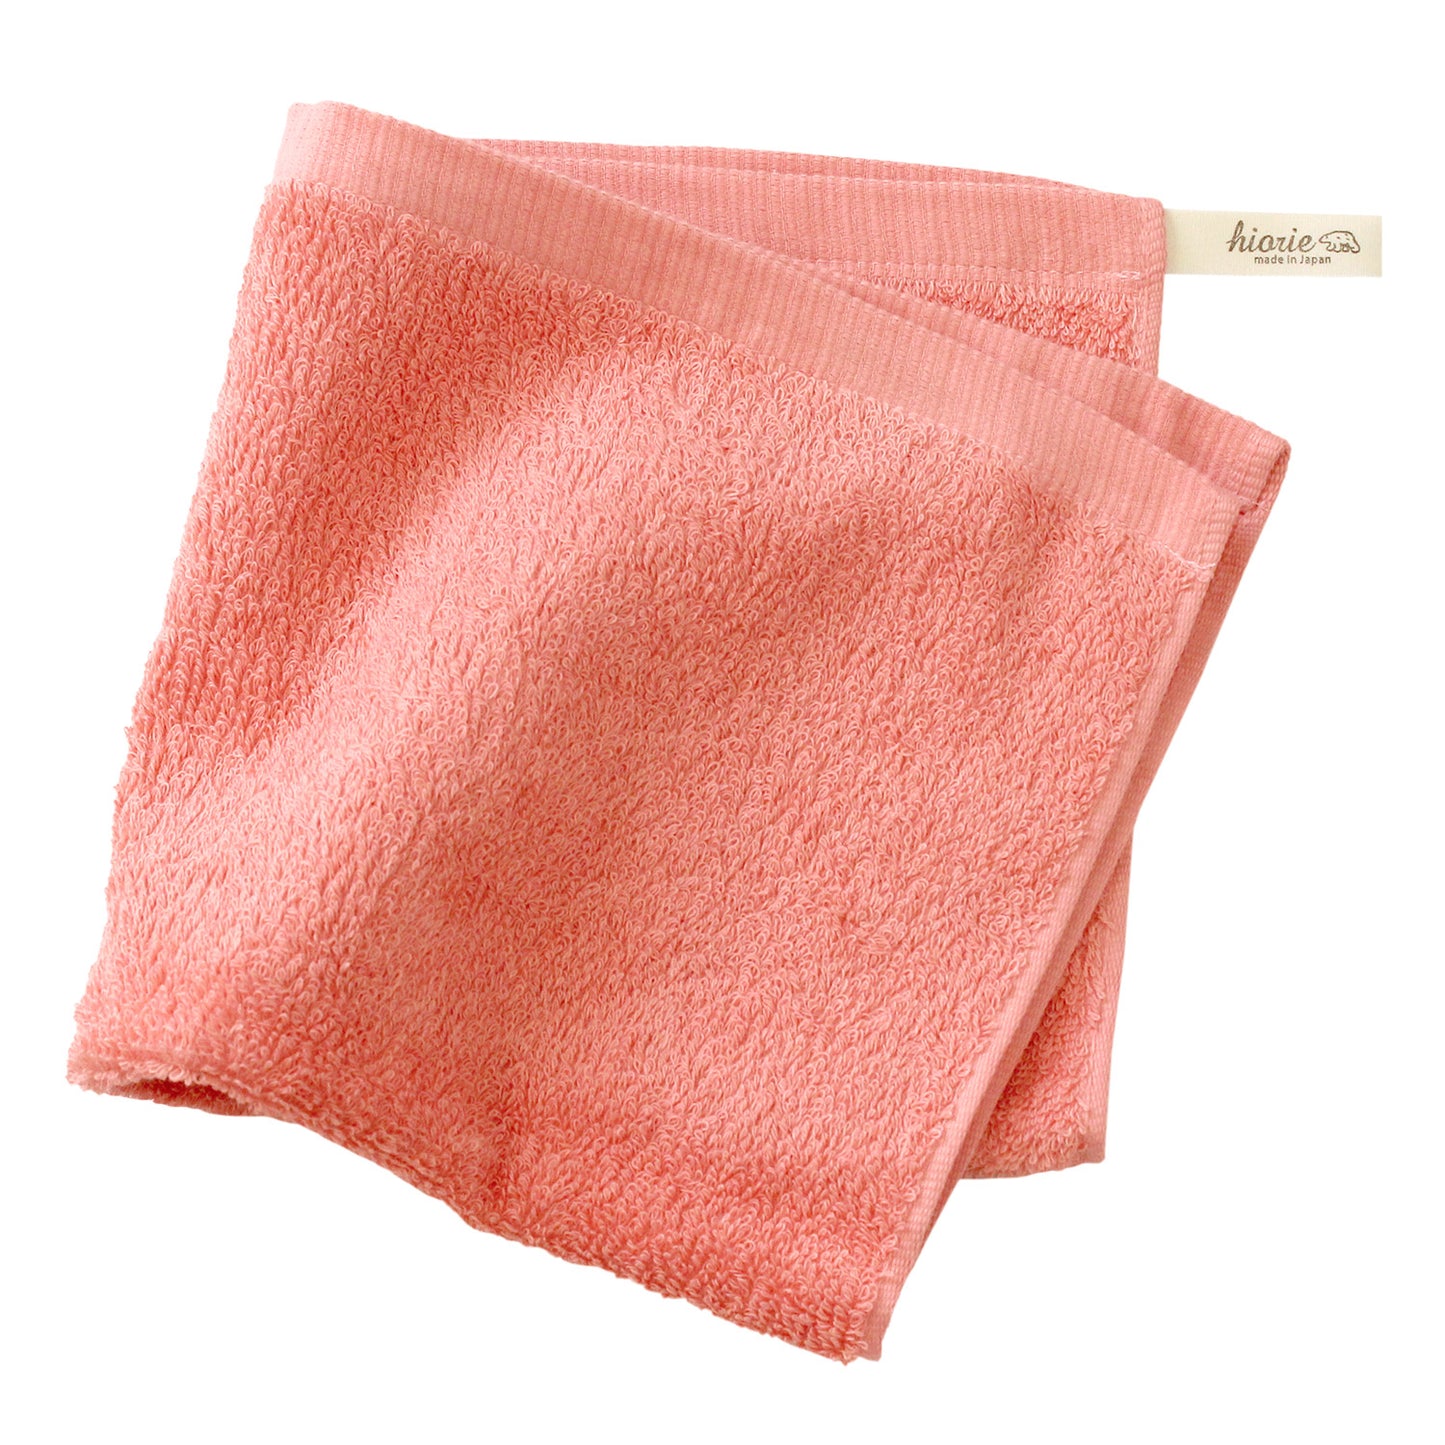 Hiorie Hotel Soft Water-Absorption Fluffy Hand Towel 1 Sheets Cotton 100% Japan